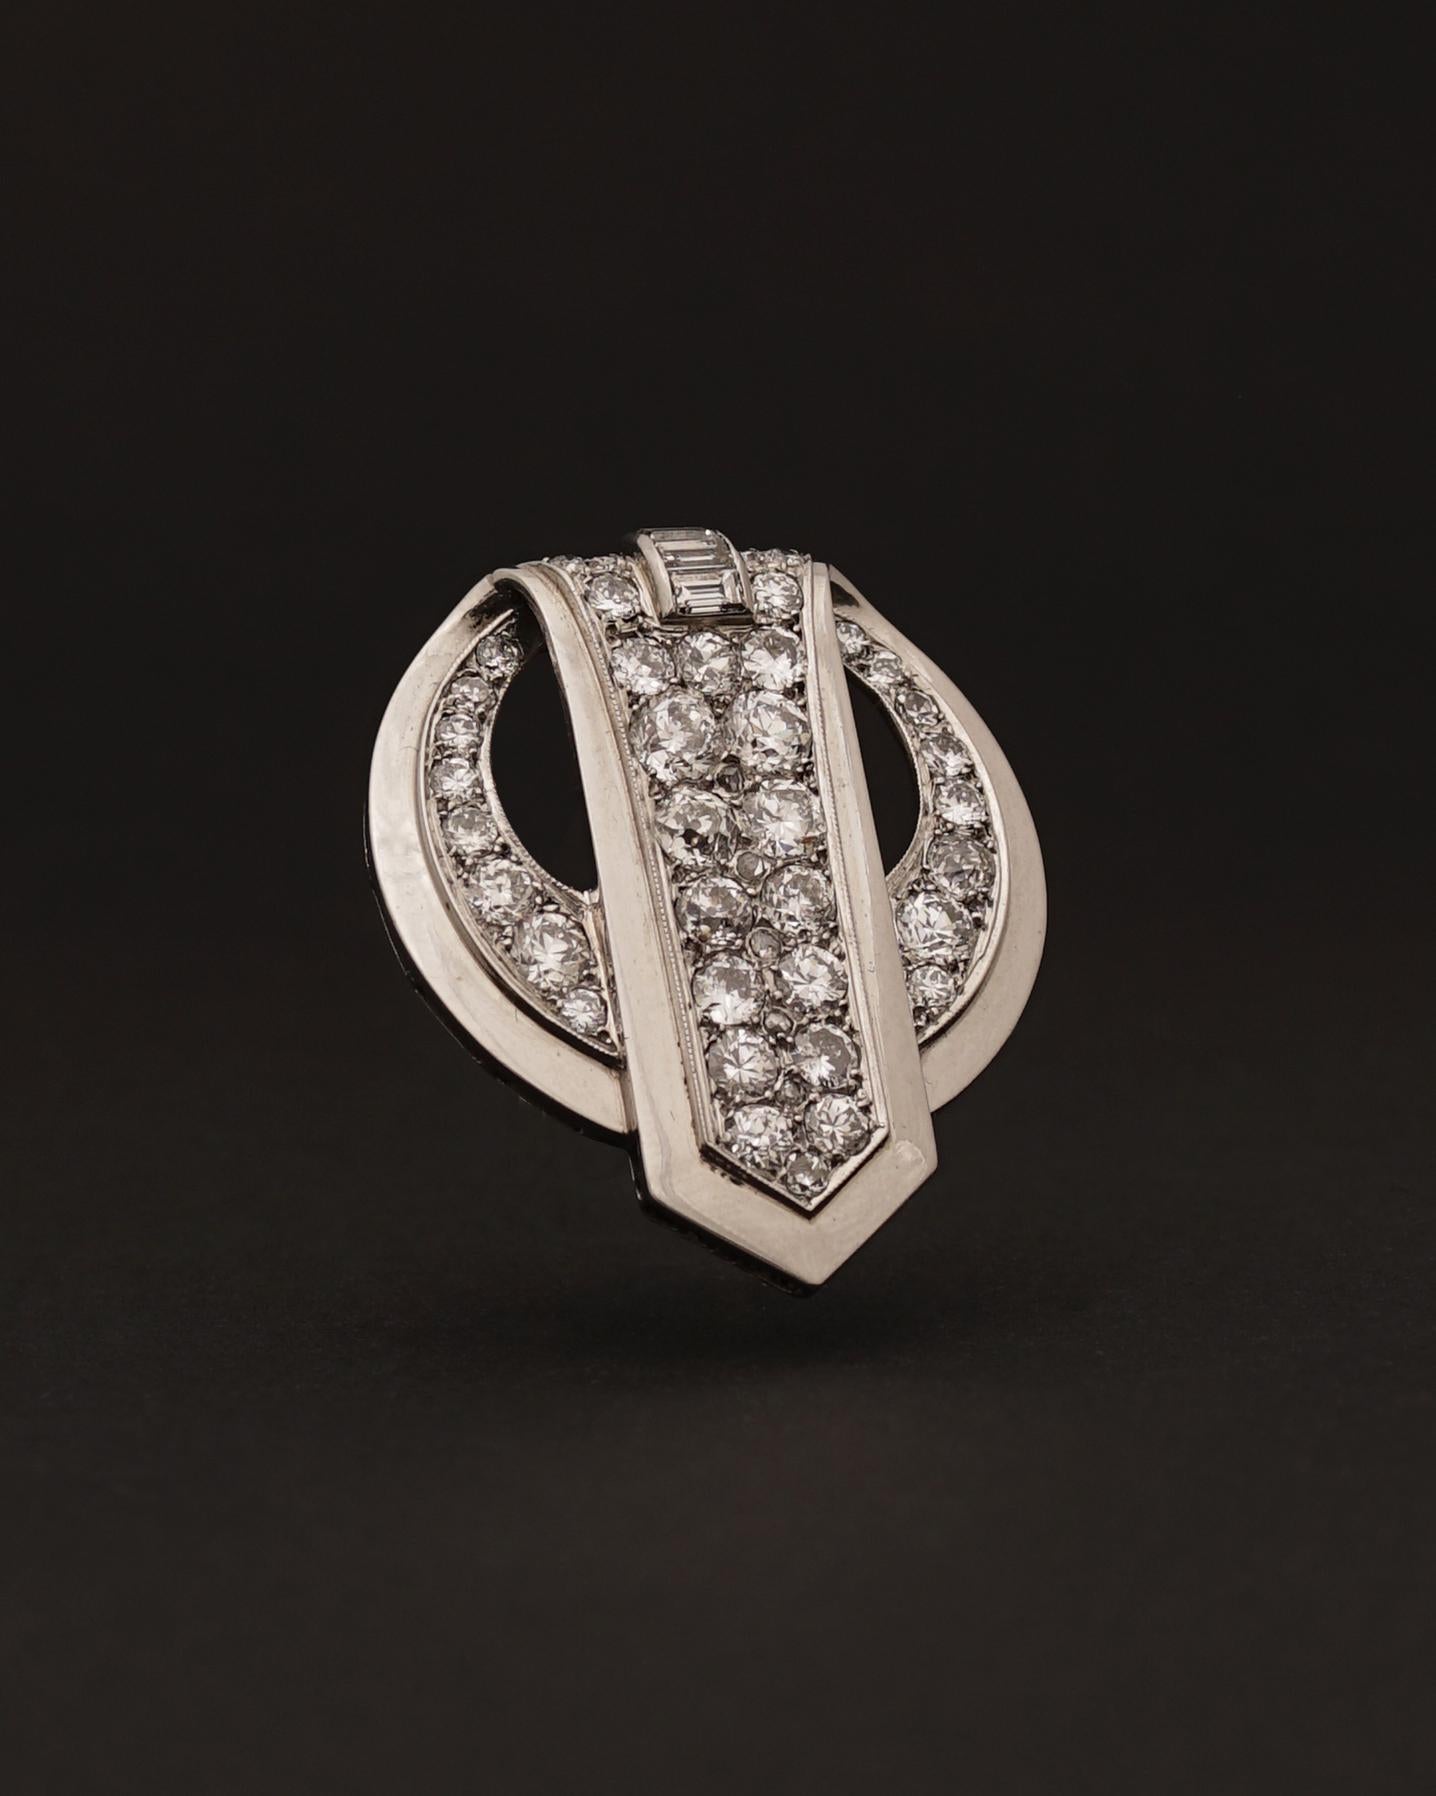 Chaumet, Paris
Stunning Platinum and Diamond Clip, Circa 1930
Set with brilliant-cut and baguette diamonds. Diamonds weigh a total of approximately 2.20 carats, on average G-H color, VS clarity.
Wears the Maker's mark for Chaumet et Cie. 12 pl.